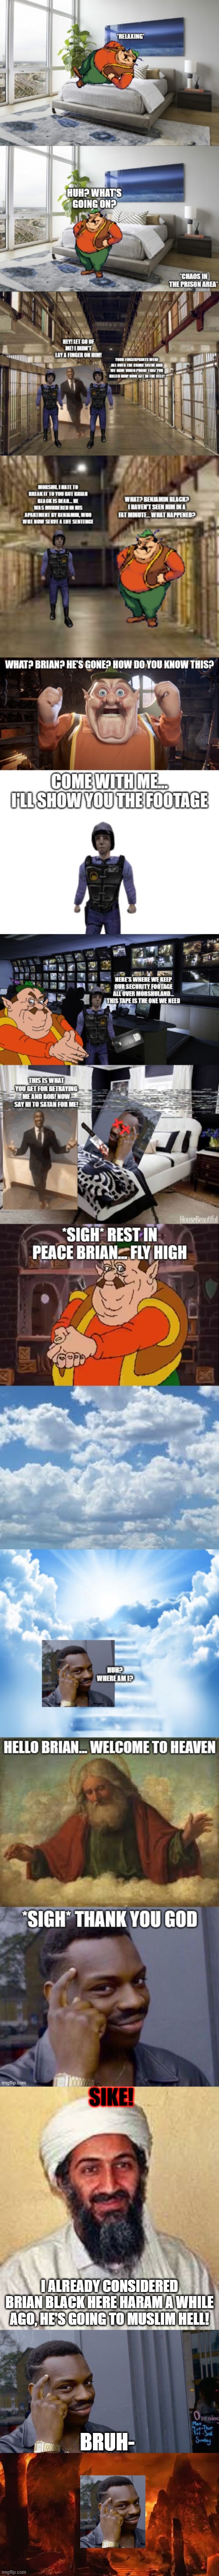 Allah did not like that plan, since Brian Black is part Muslim Allah can send him to hell when he dies | SIKE! I ALREADY CONSIDERED BRIAN BLACK HERE HARAM A WHILE AGO, HE'S GOING TO MUSLIM HELL! BRUH- | image tagged in allah akbar,memes,roll safe think about it,islamic hell | made w/ Imgflip meme maker